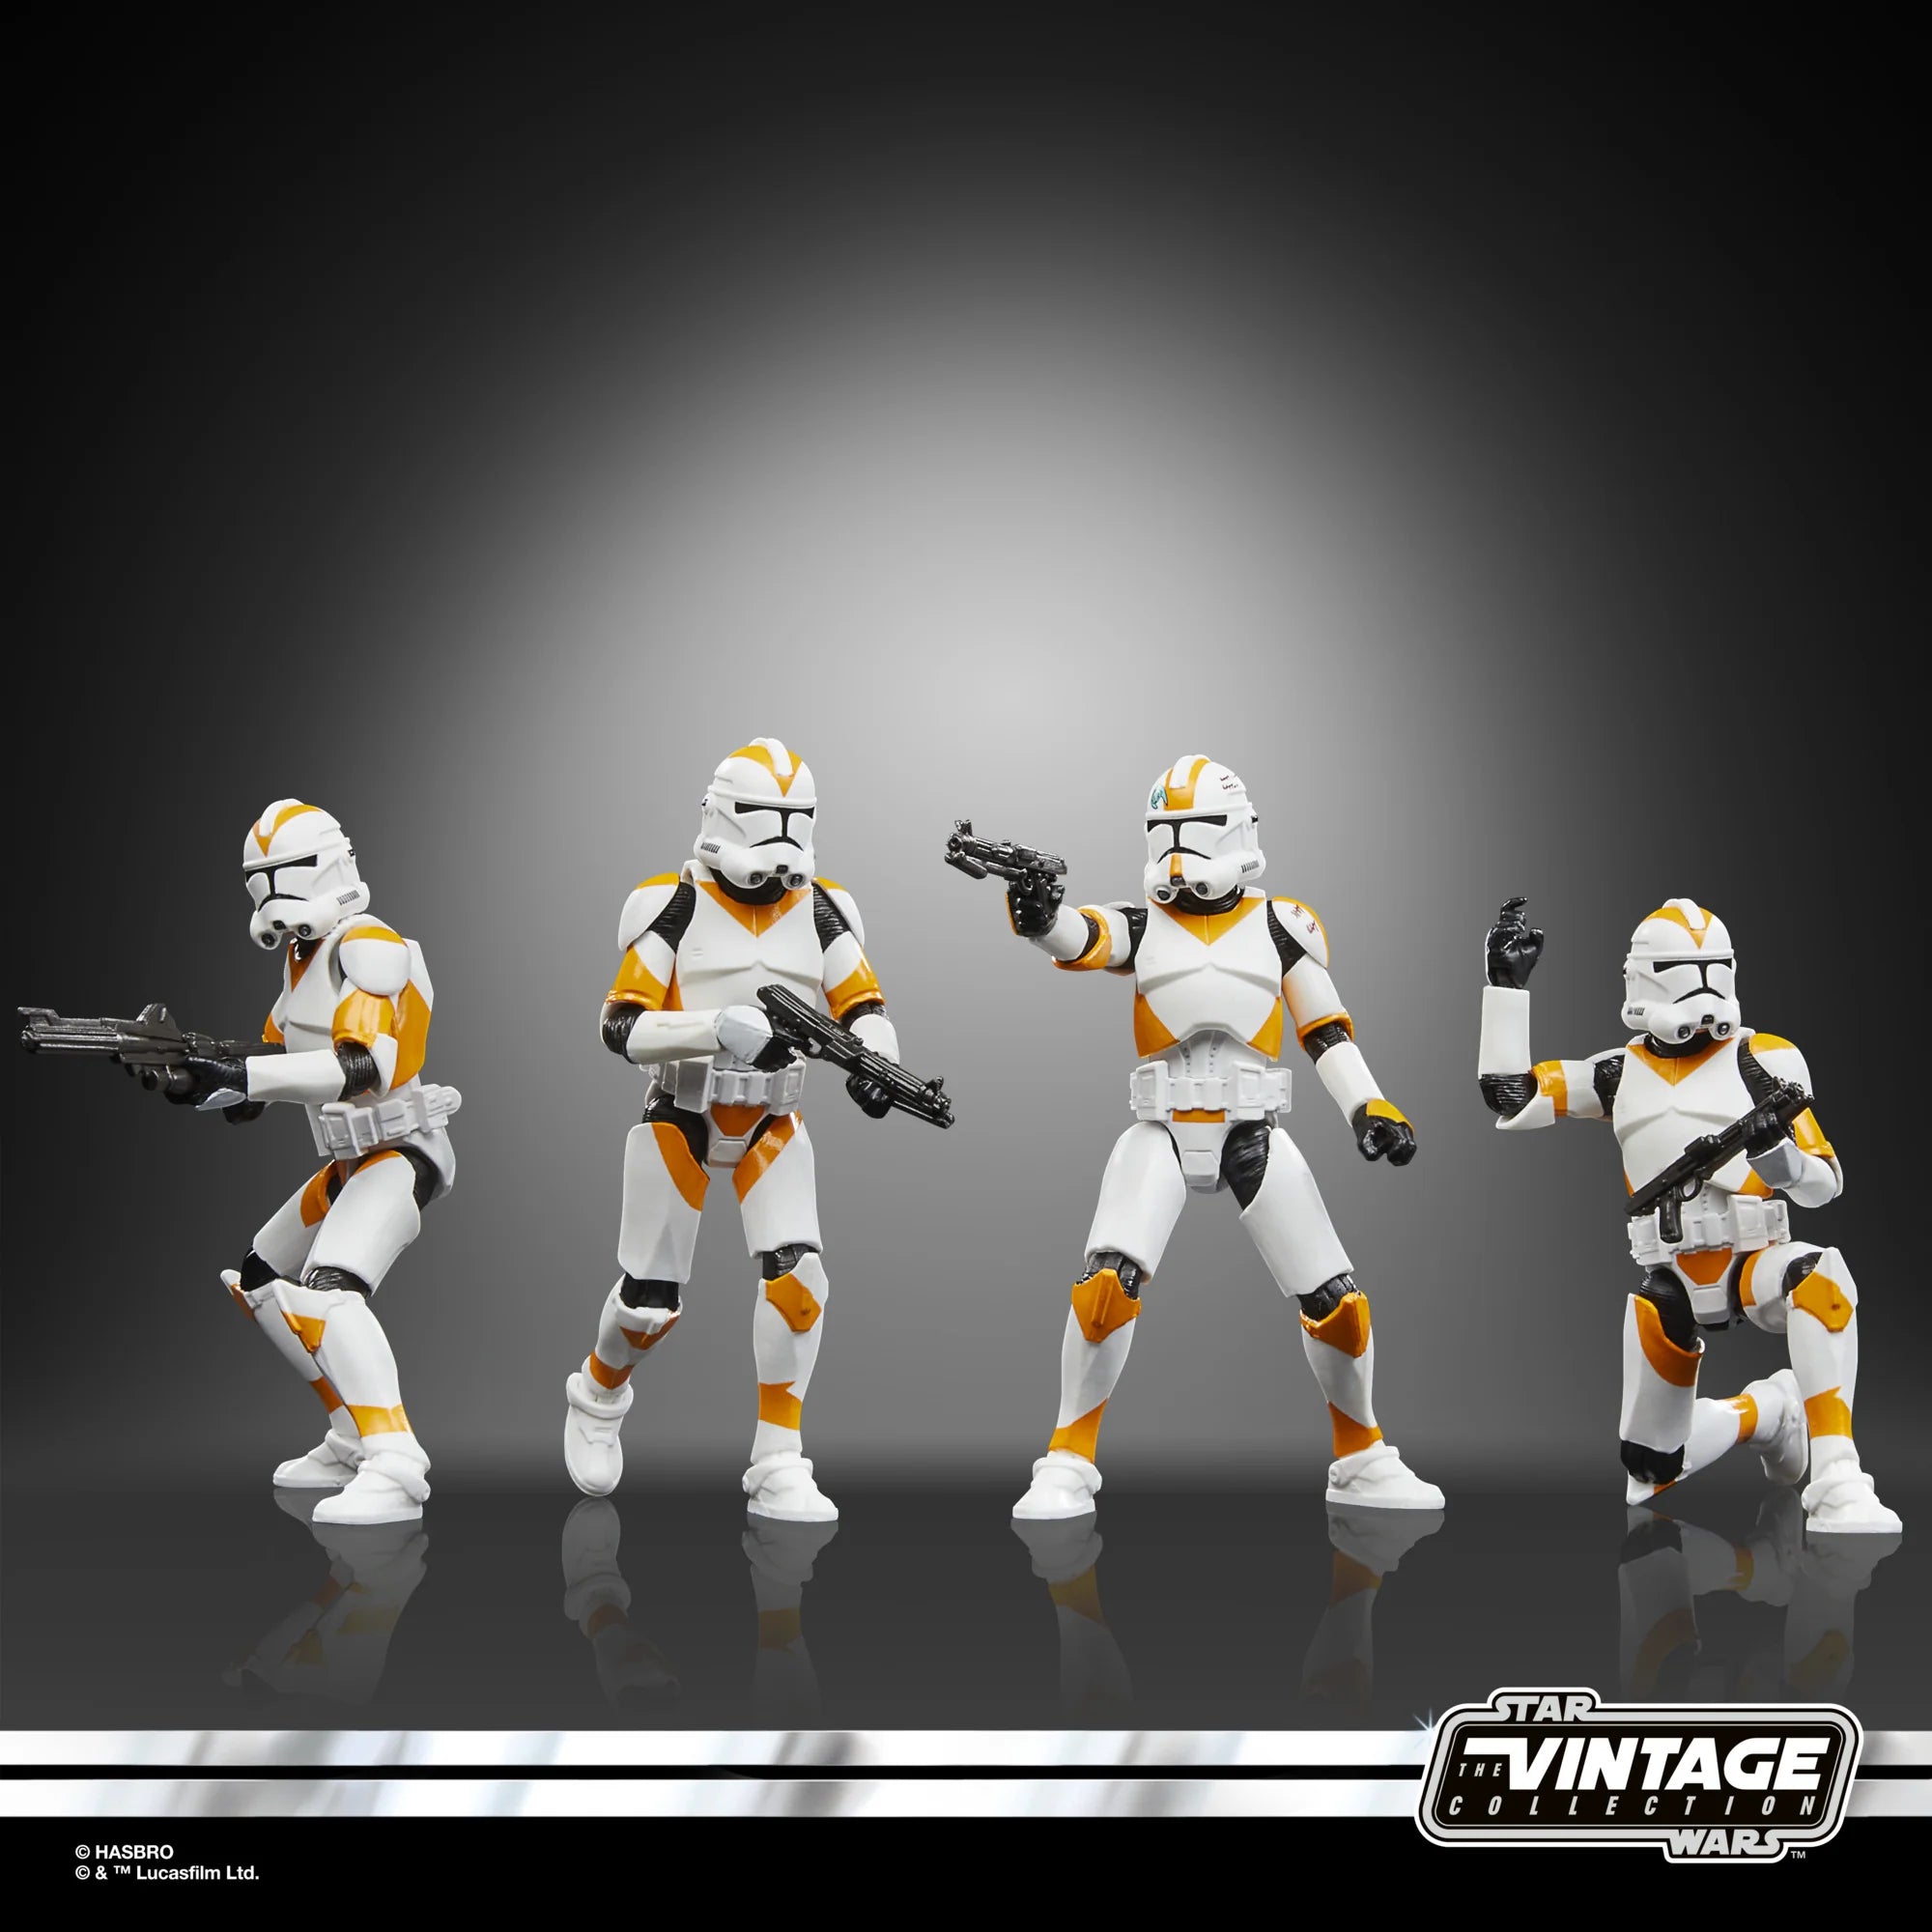 Star Wars Vintage Collection Phase II Clone Trooper (212th) F6985 3.75" Action Figure 4-Pack